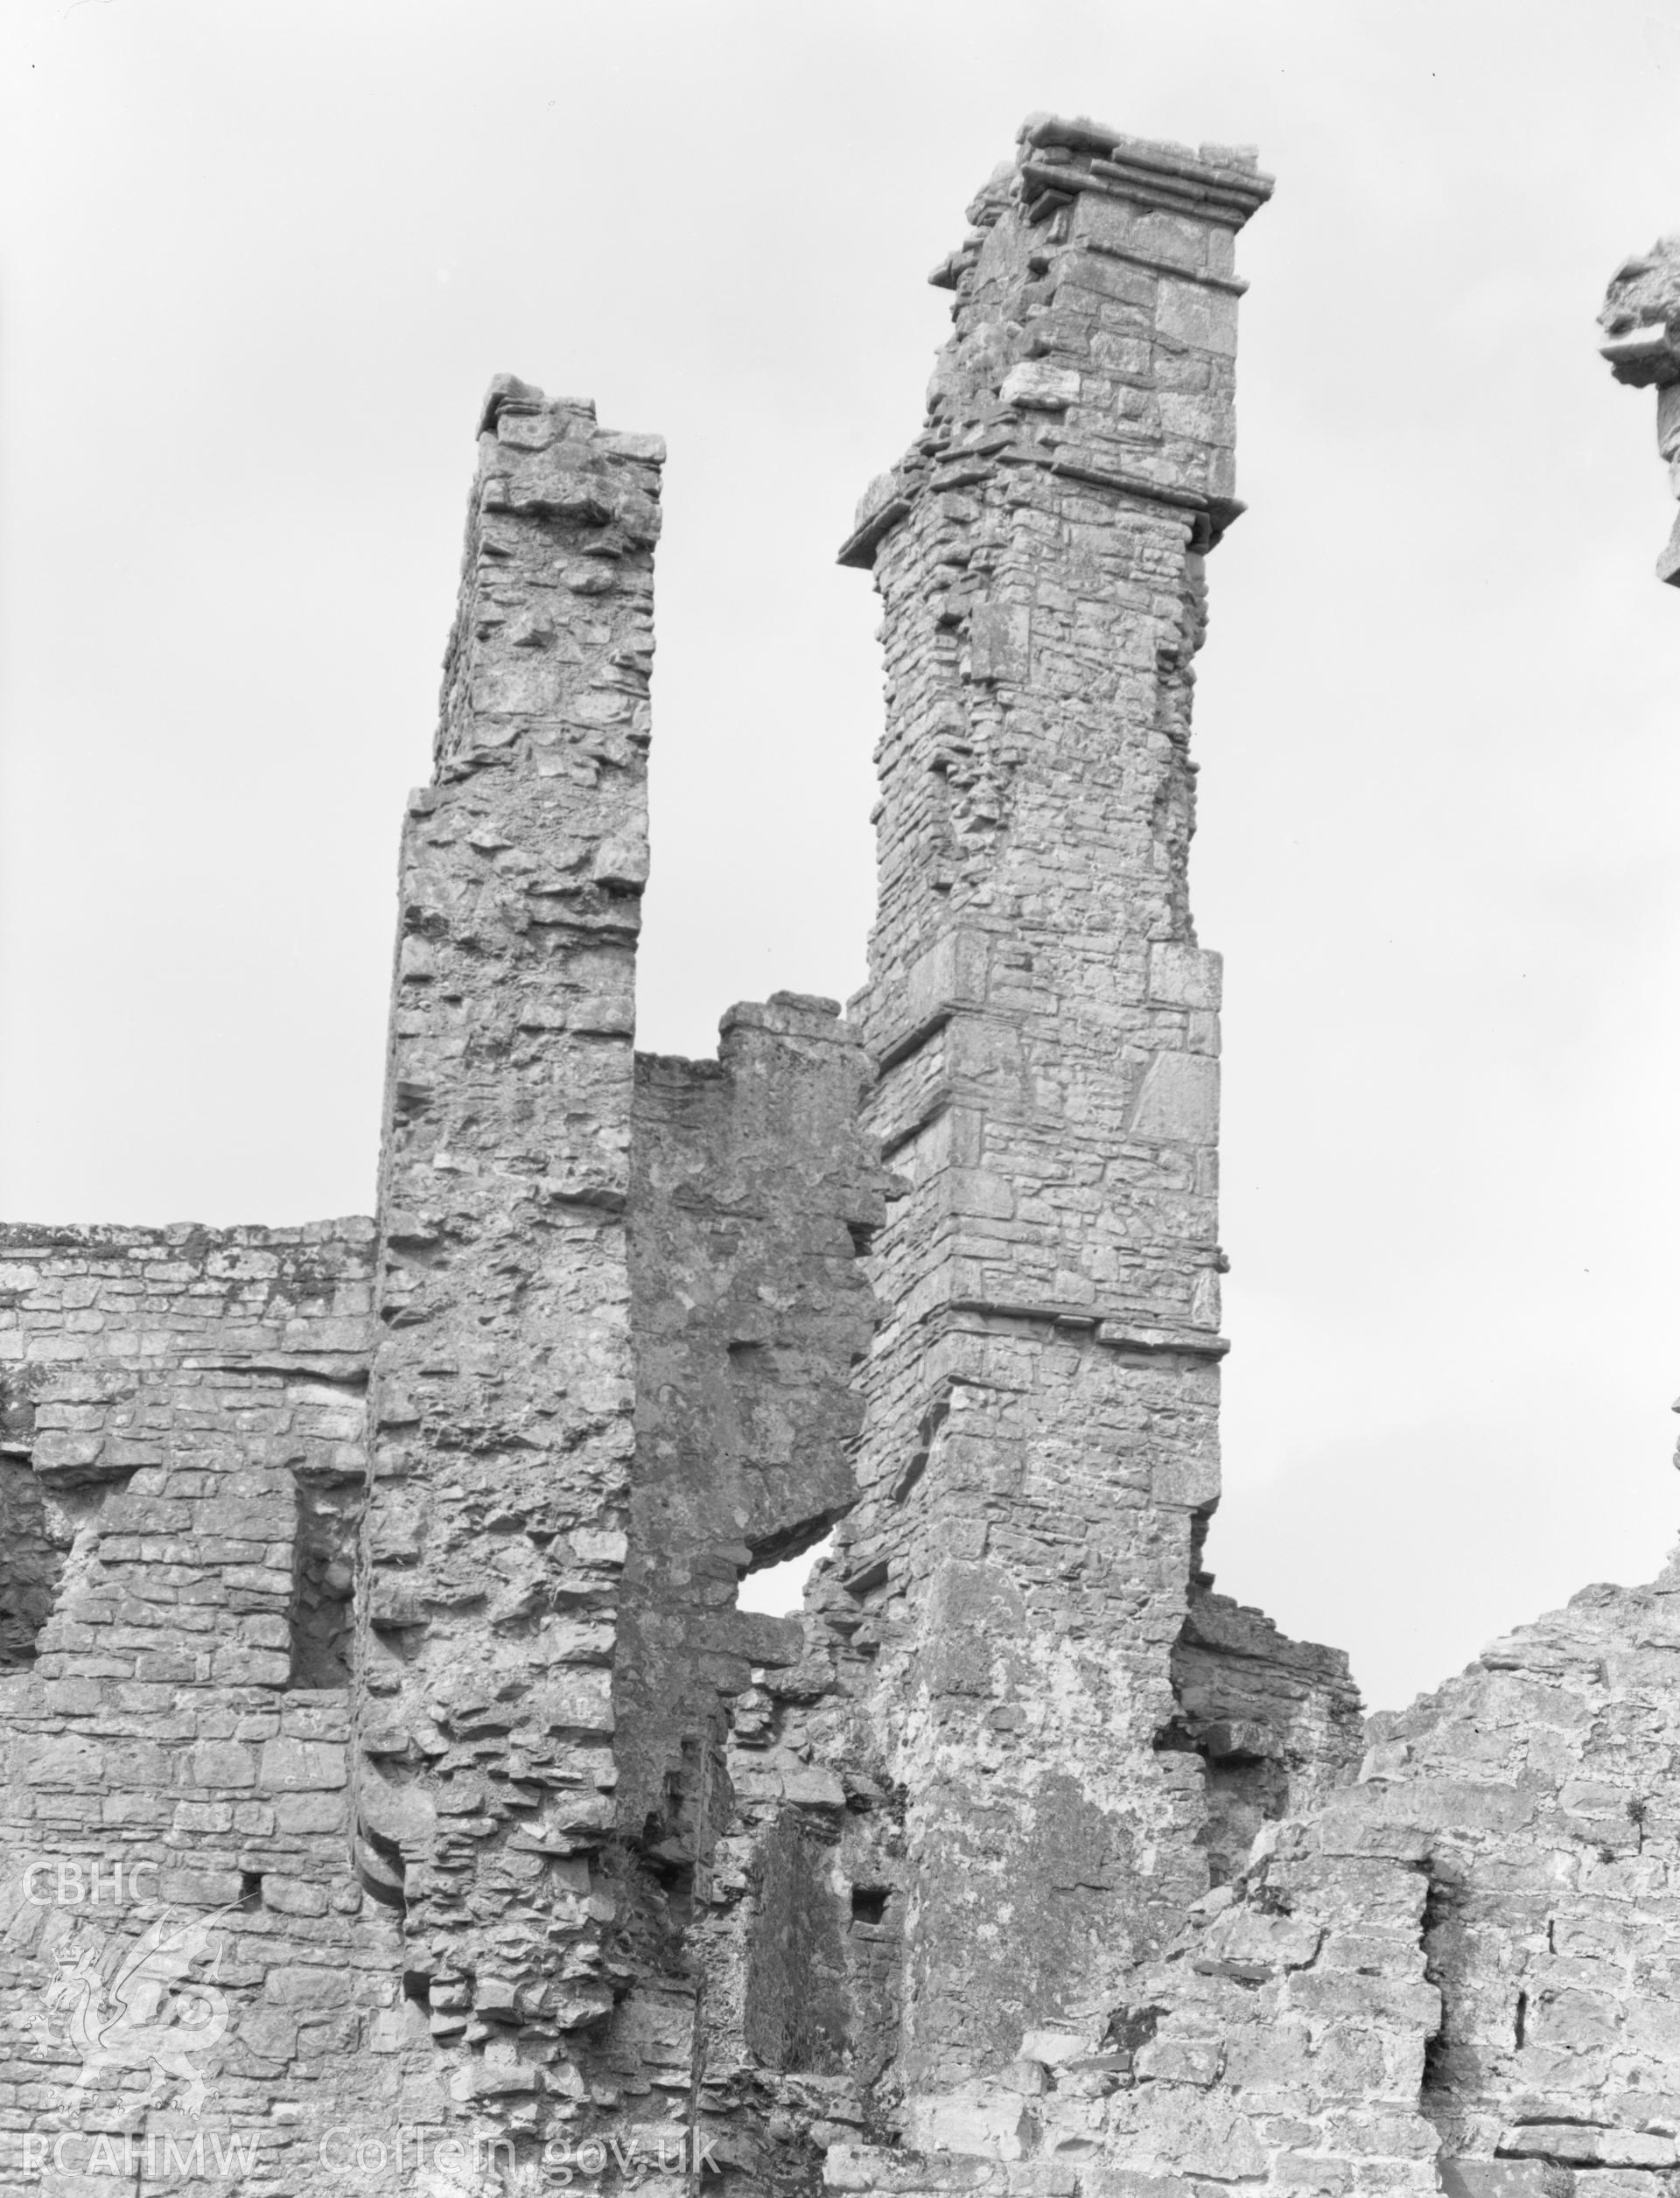 View of chimney at Coity Castle, Coity Higher taken 09.04.65.